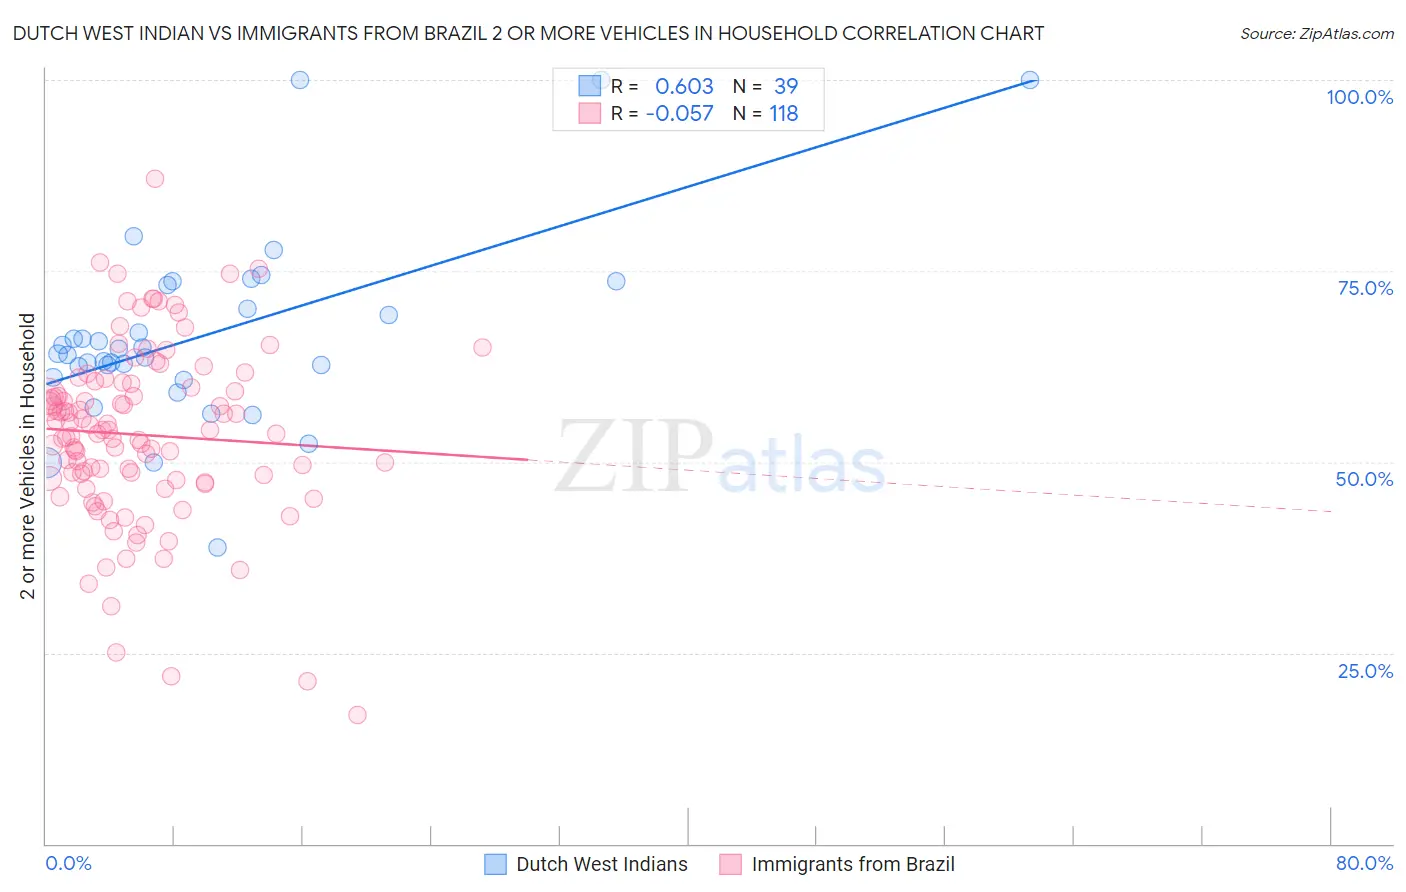 Dutch West Indian vs Immigrants from Brazil 2 or more Vehicles in Household